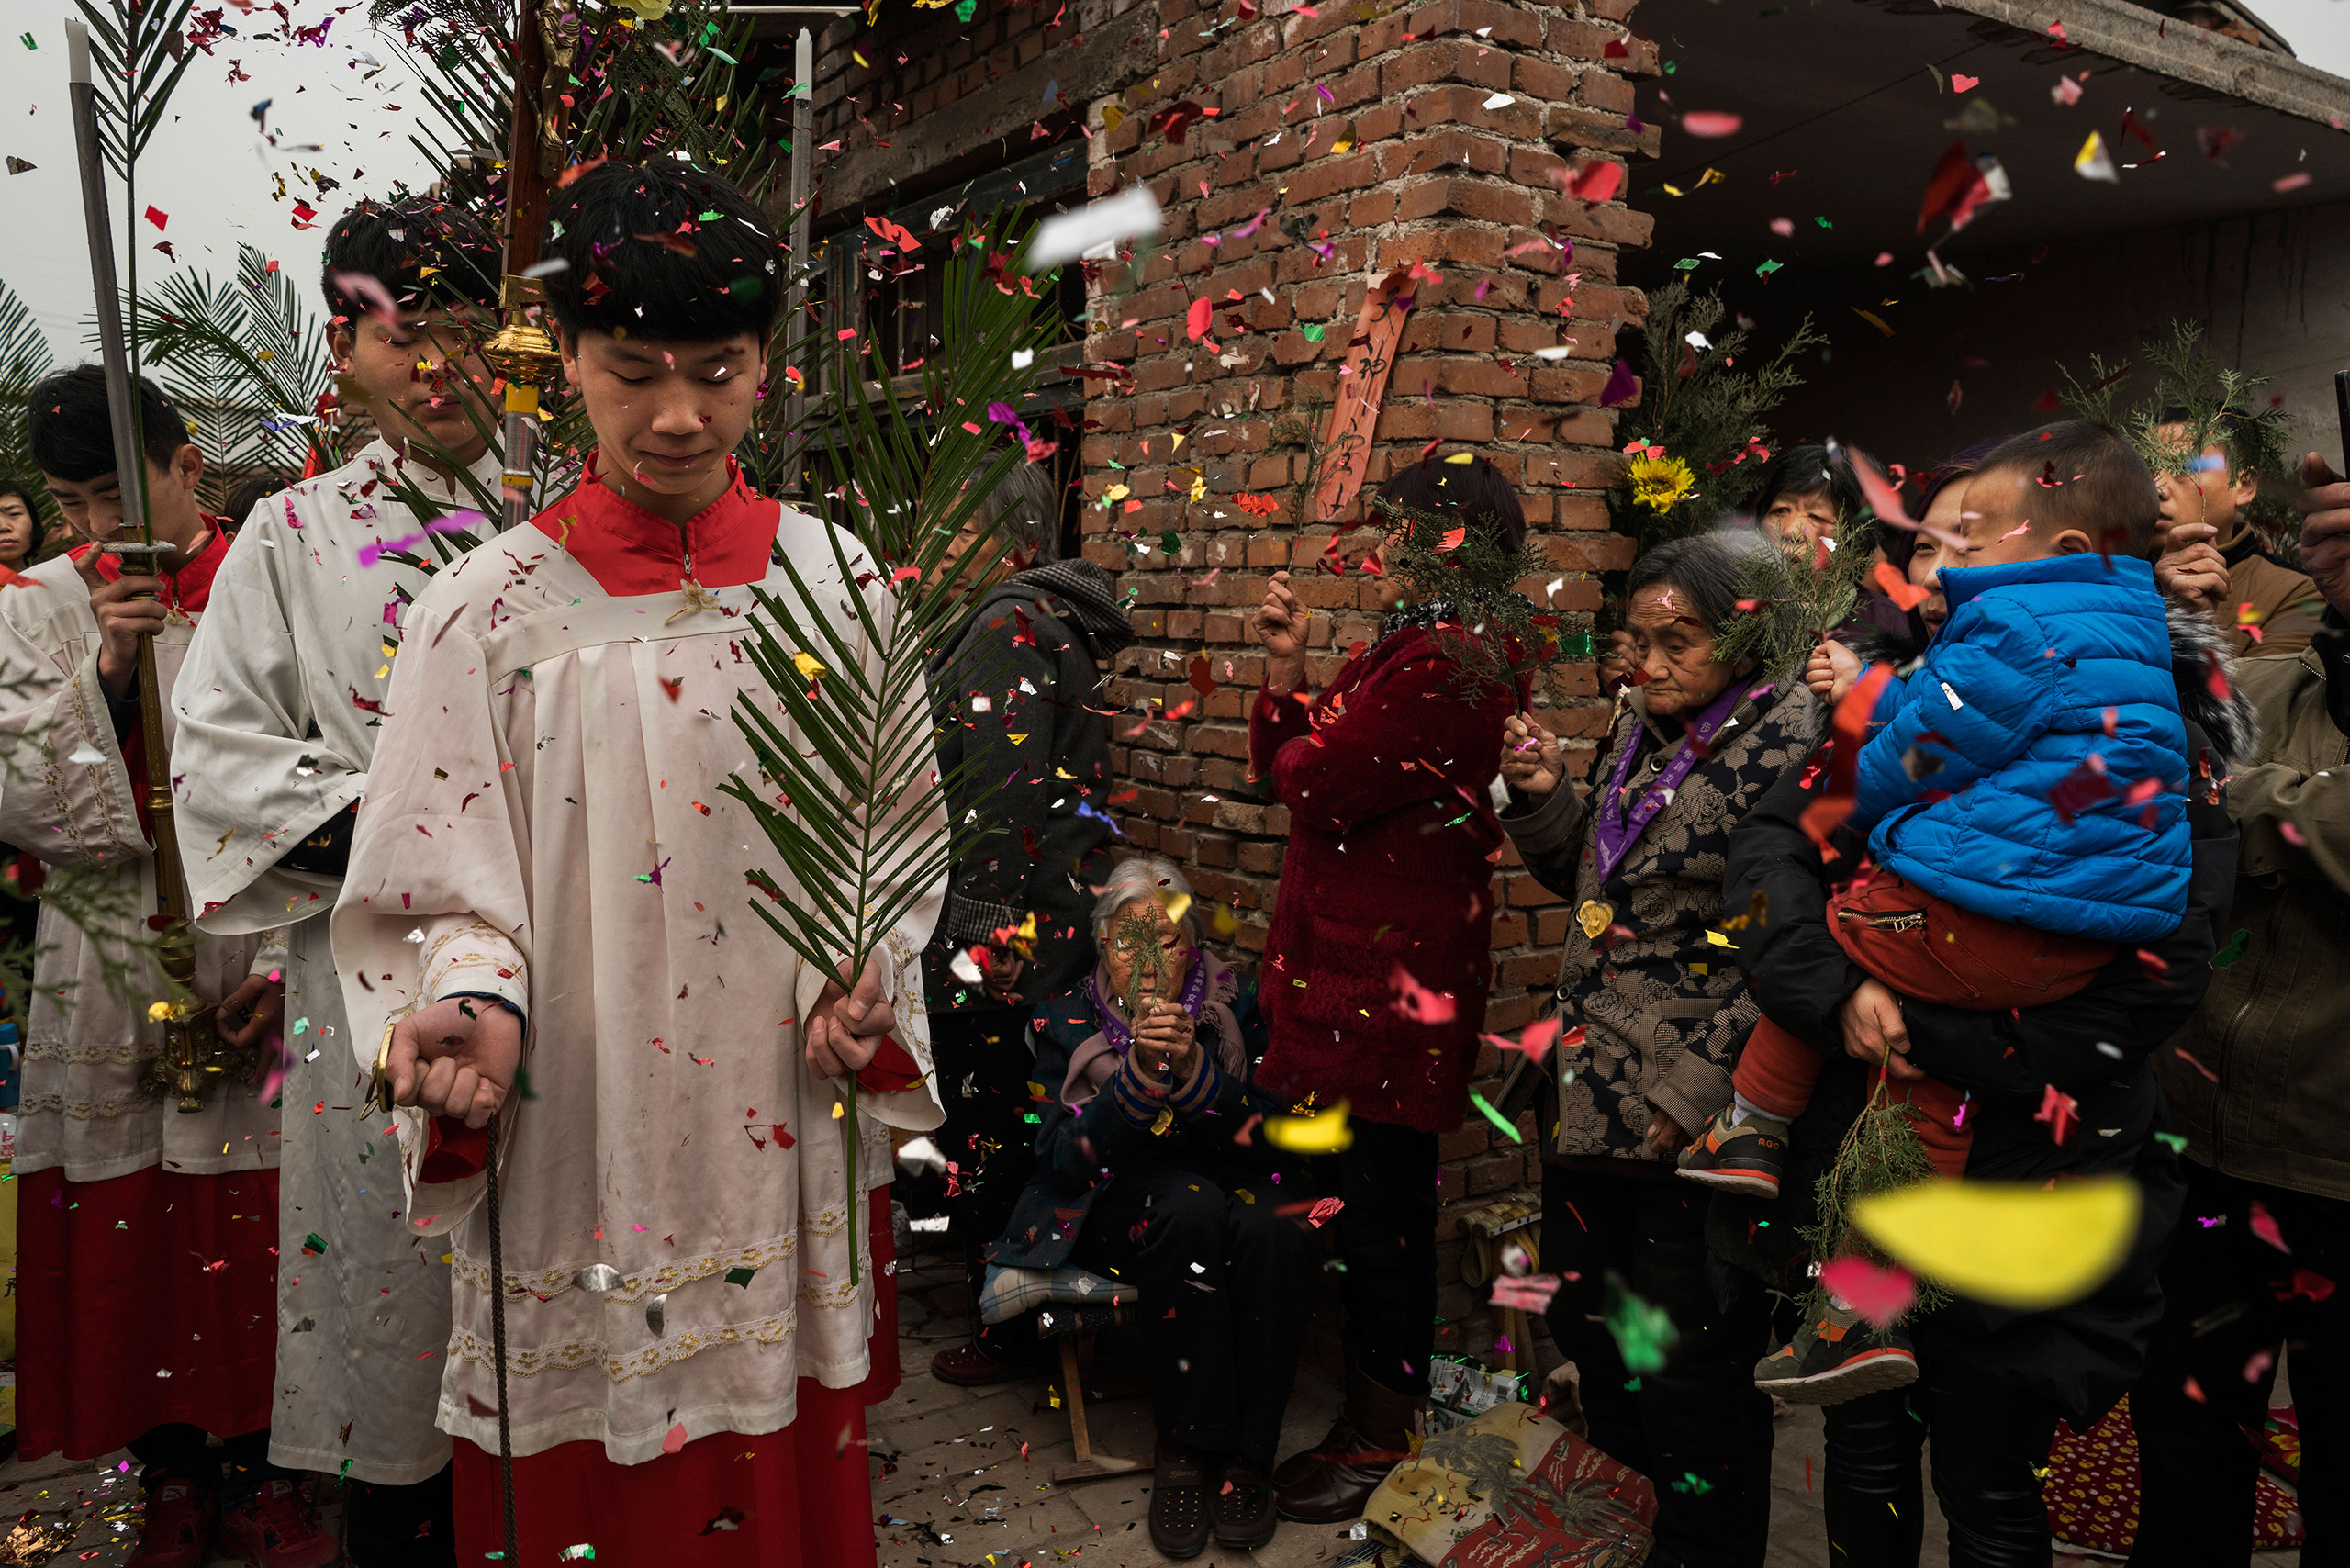 Altar boys during a procession through the congregation at an underground Palm Sunday service in the yard of a house in Youtong village, Shijiazhuang, China, March 20, 2016.